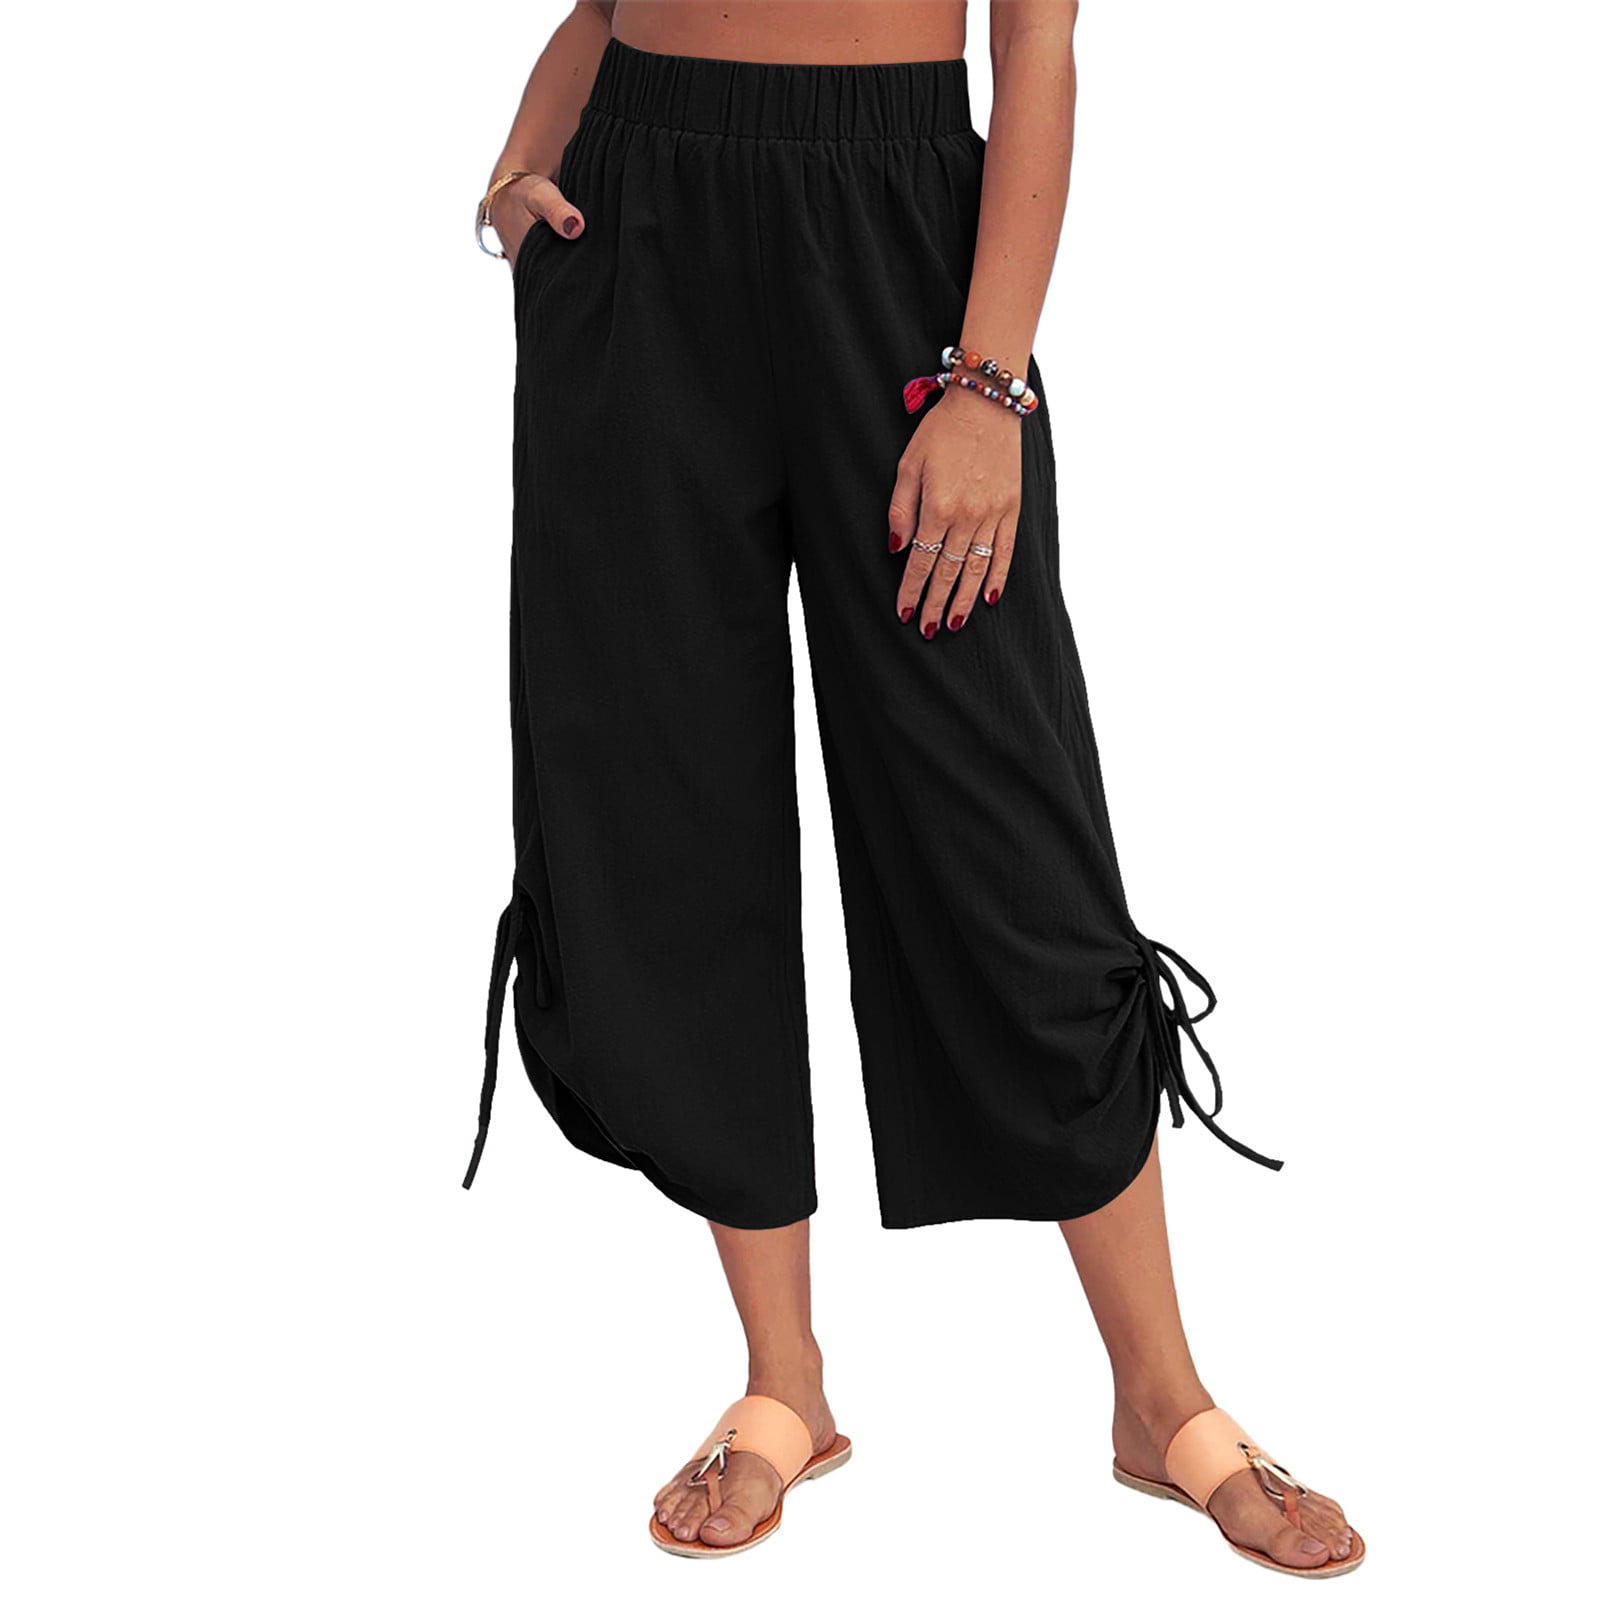 Womens Linen Pants for sale in Los Angeles California  Facebook  Marketplace  Facebook